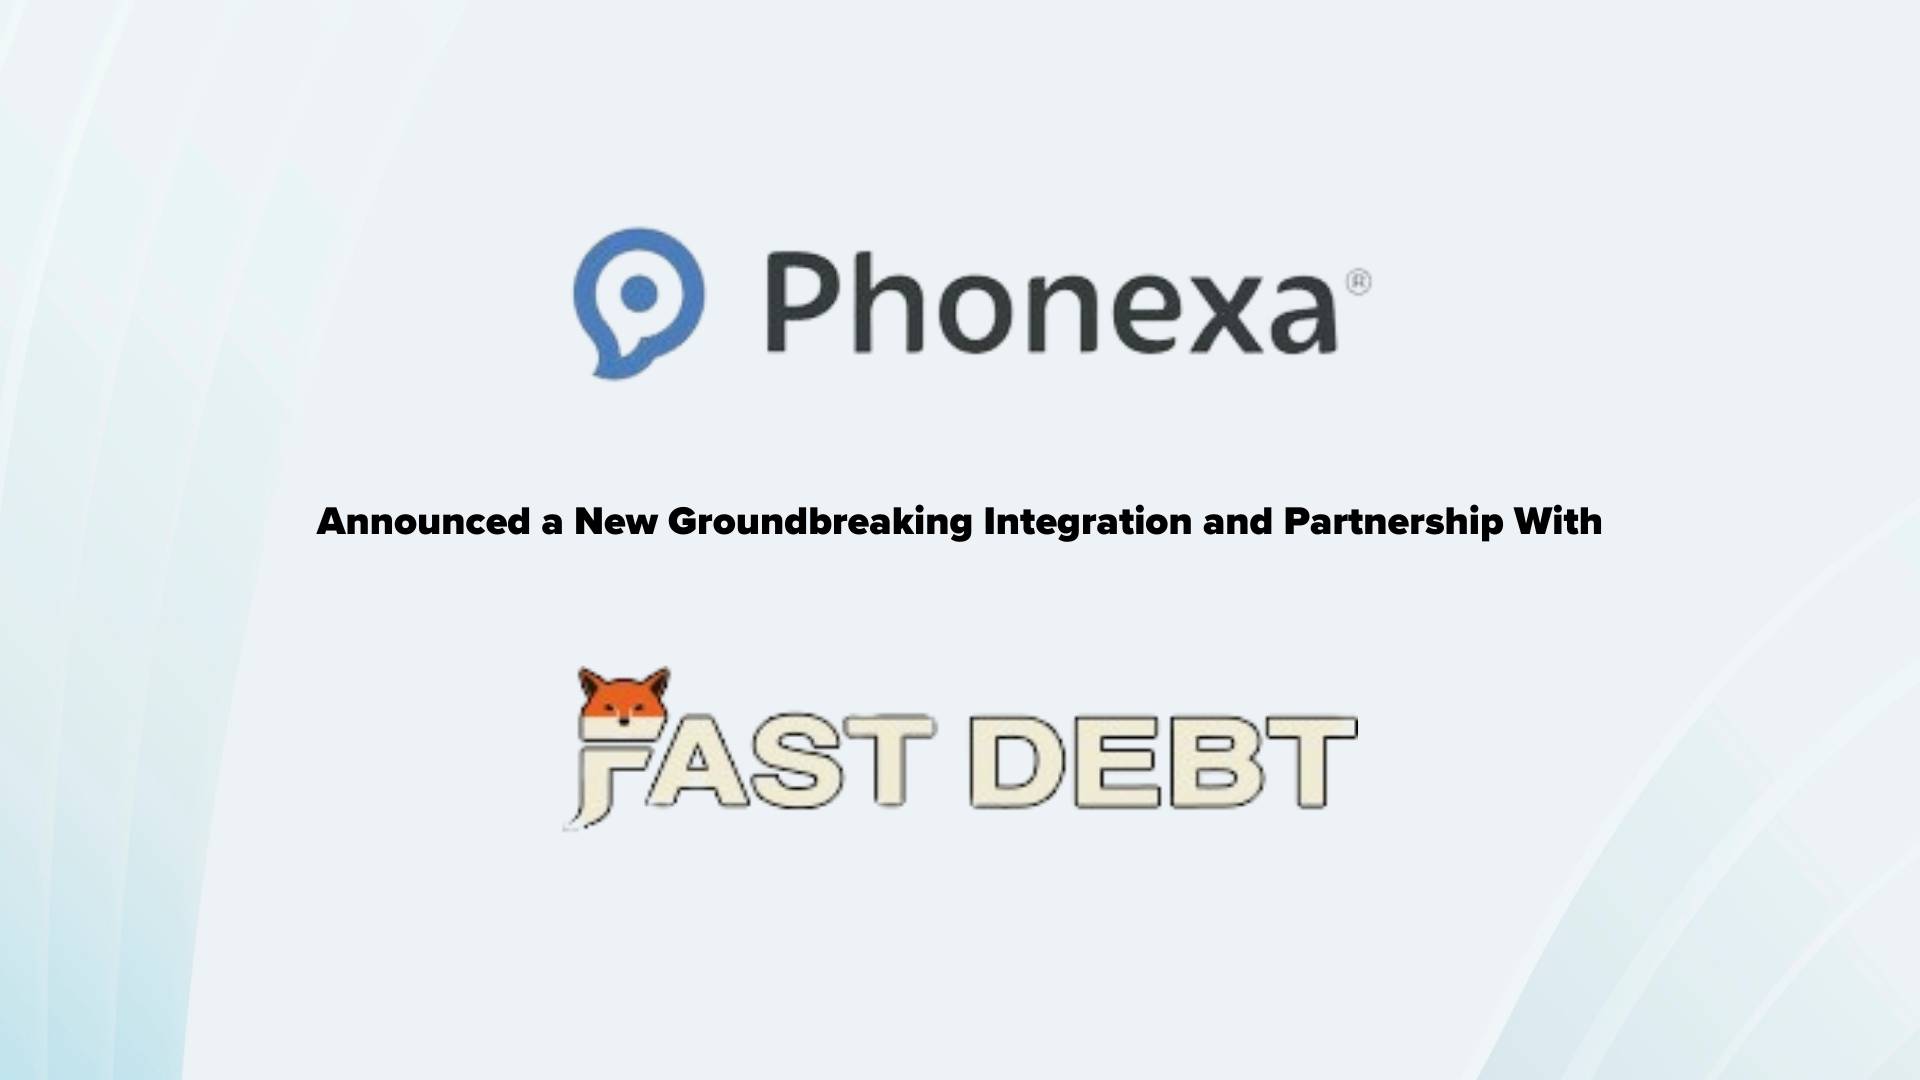 Phonexa Partners with Fast Debt, Becomes First Lead Management & Call Tracking Platform to Offer Consumer Analysis in Real Time